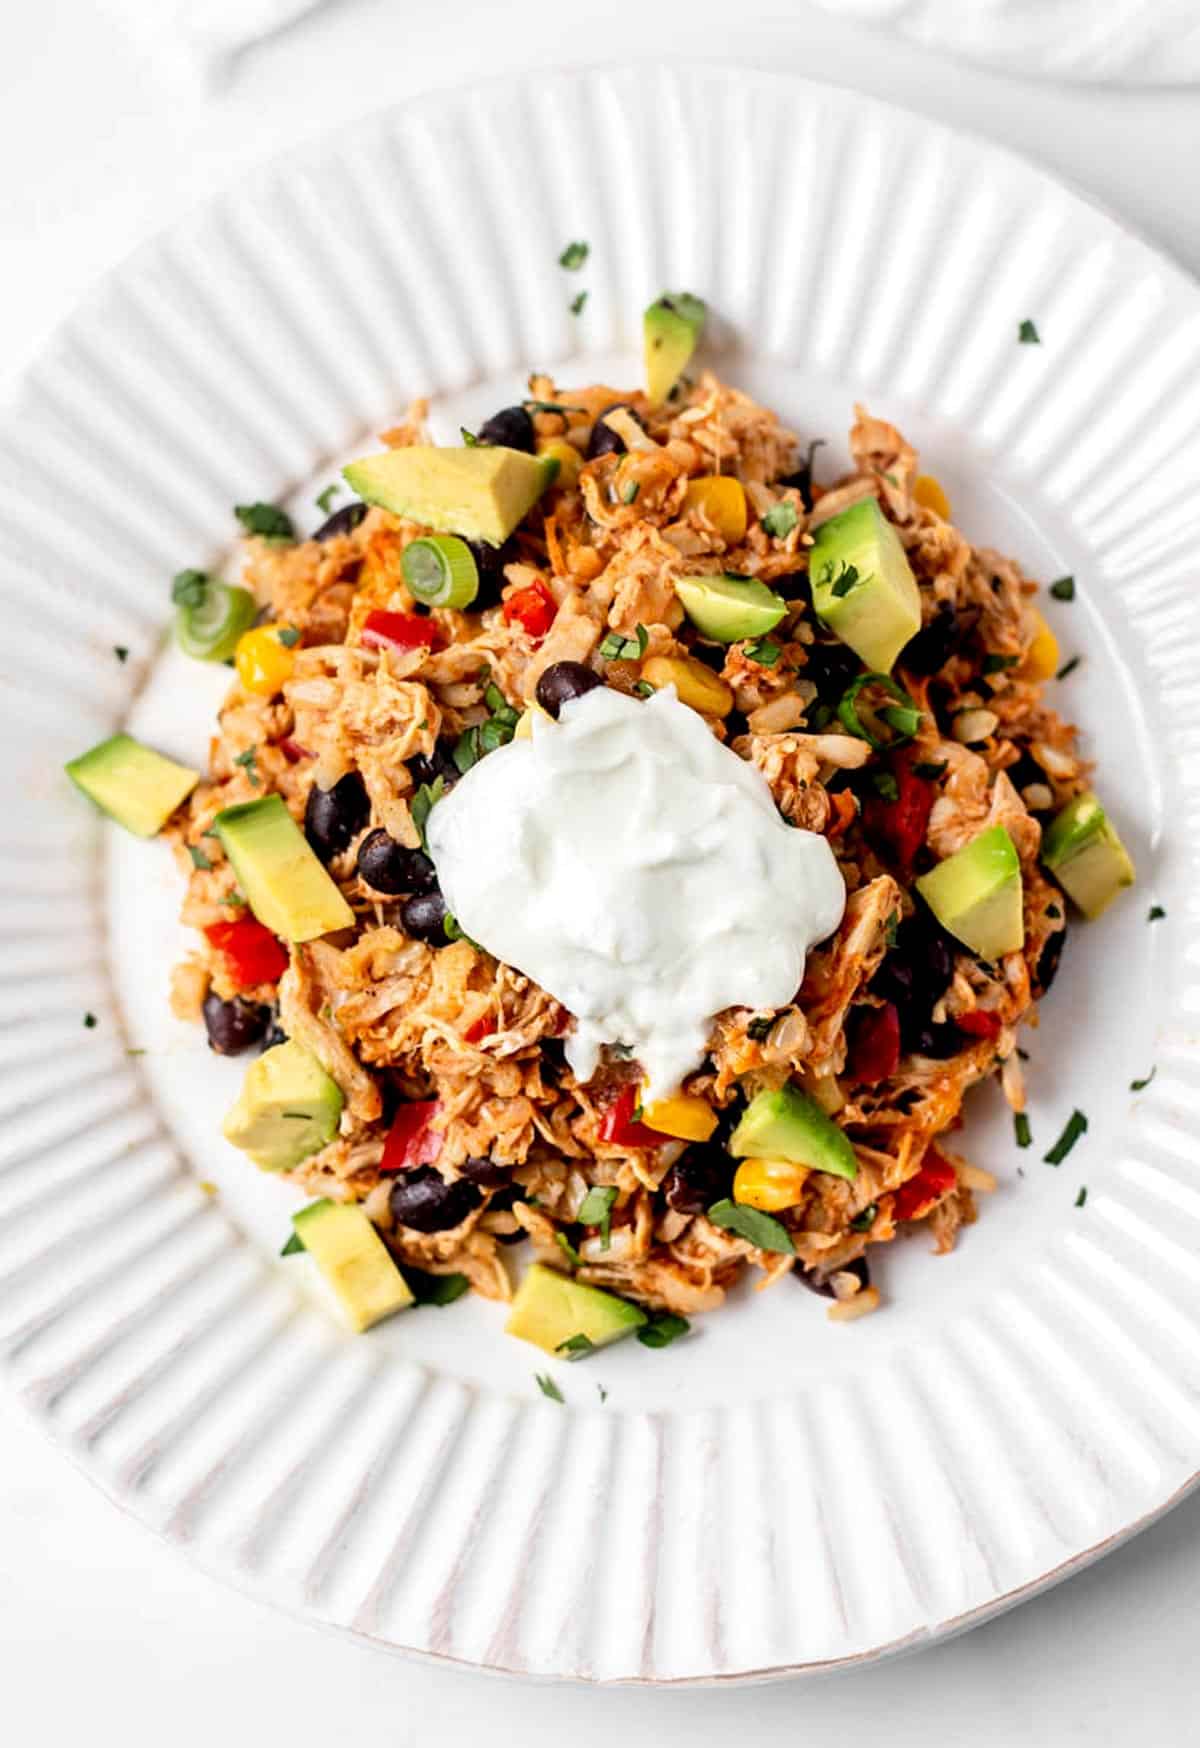 Shredded chicken burrito rice bowl topped with diced avocado and Greek yogurt.